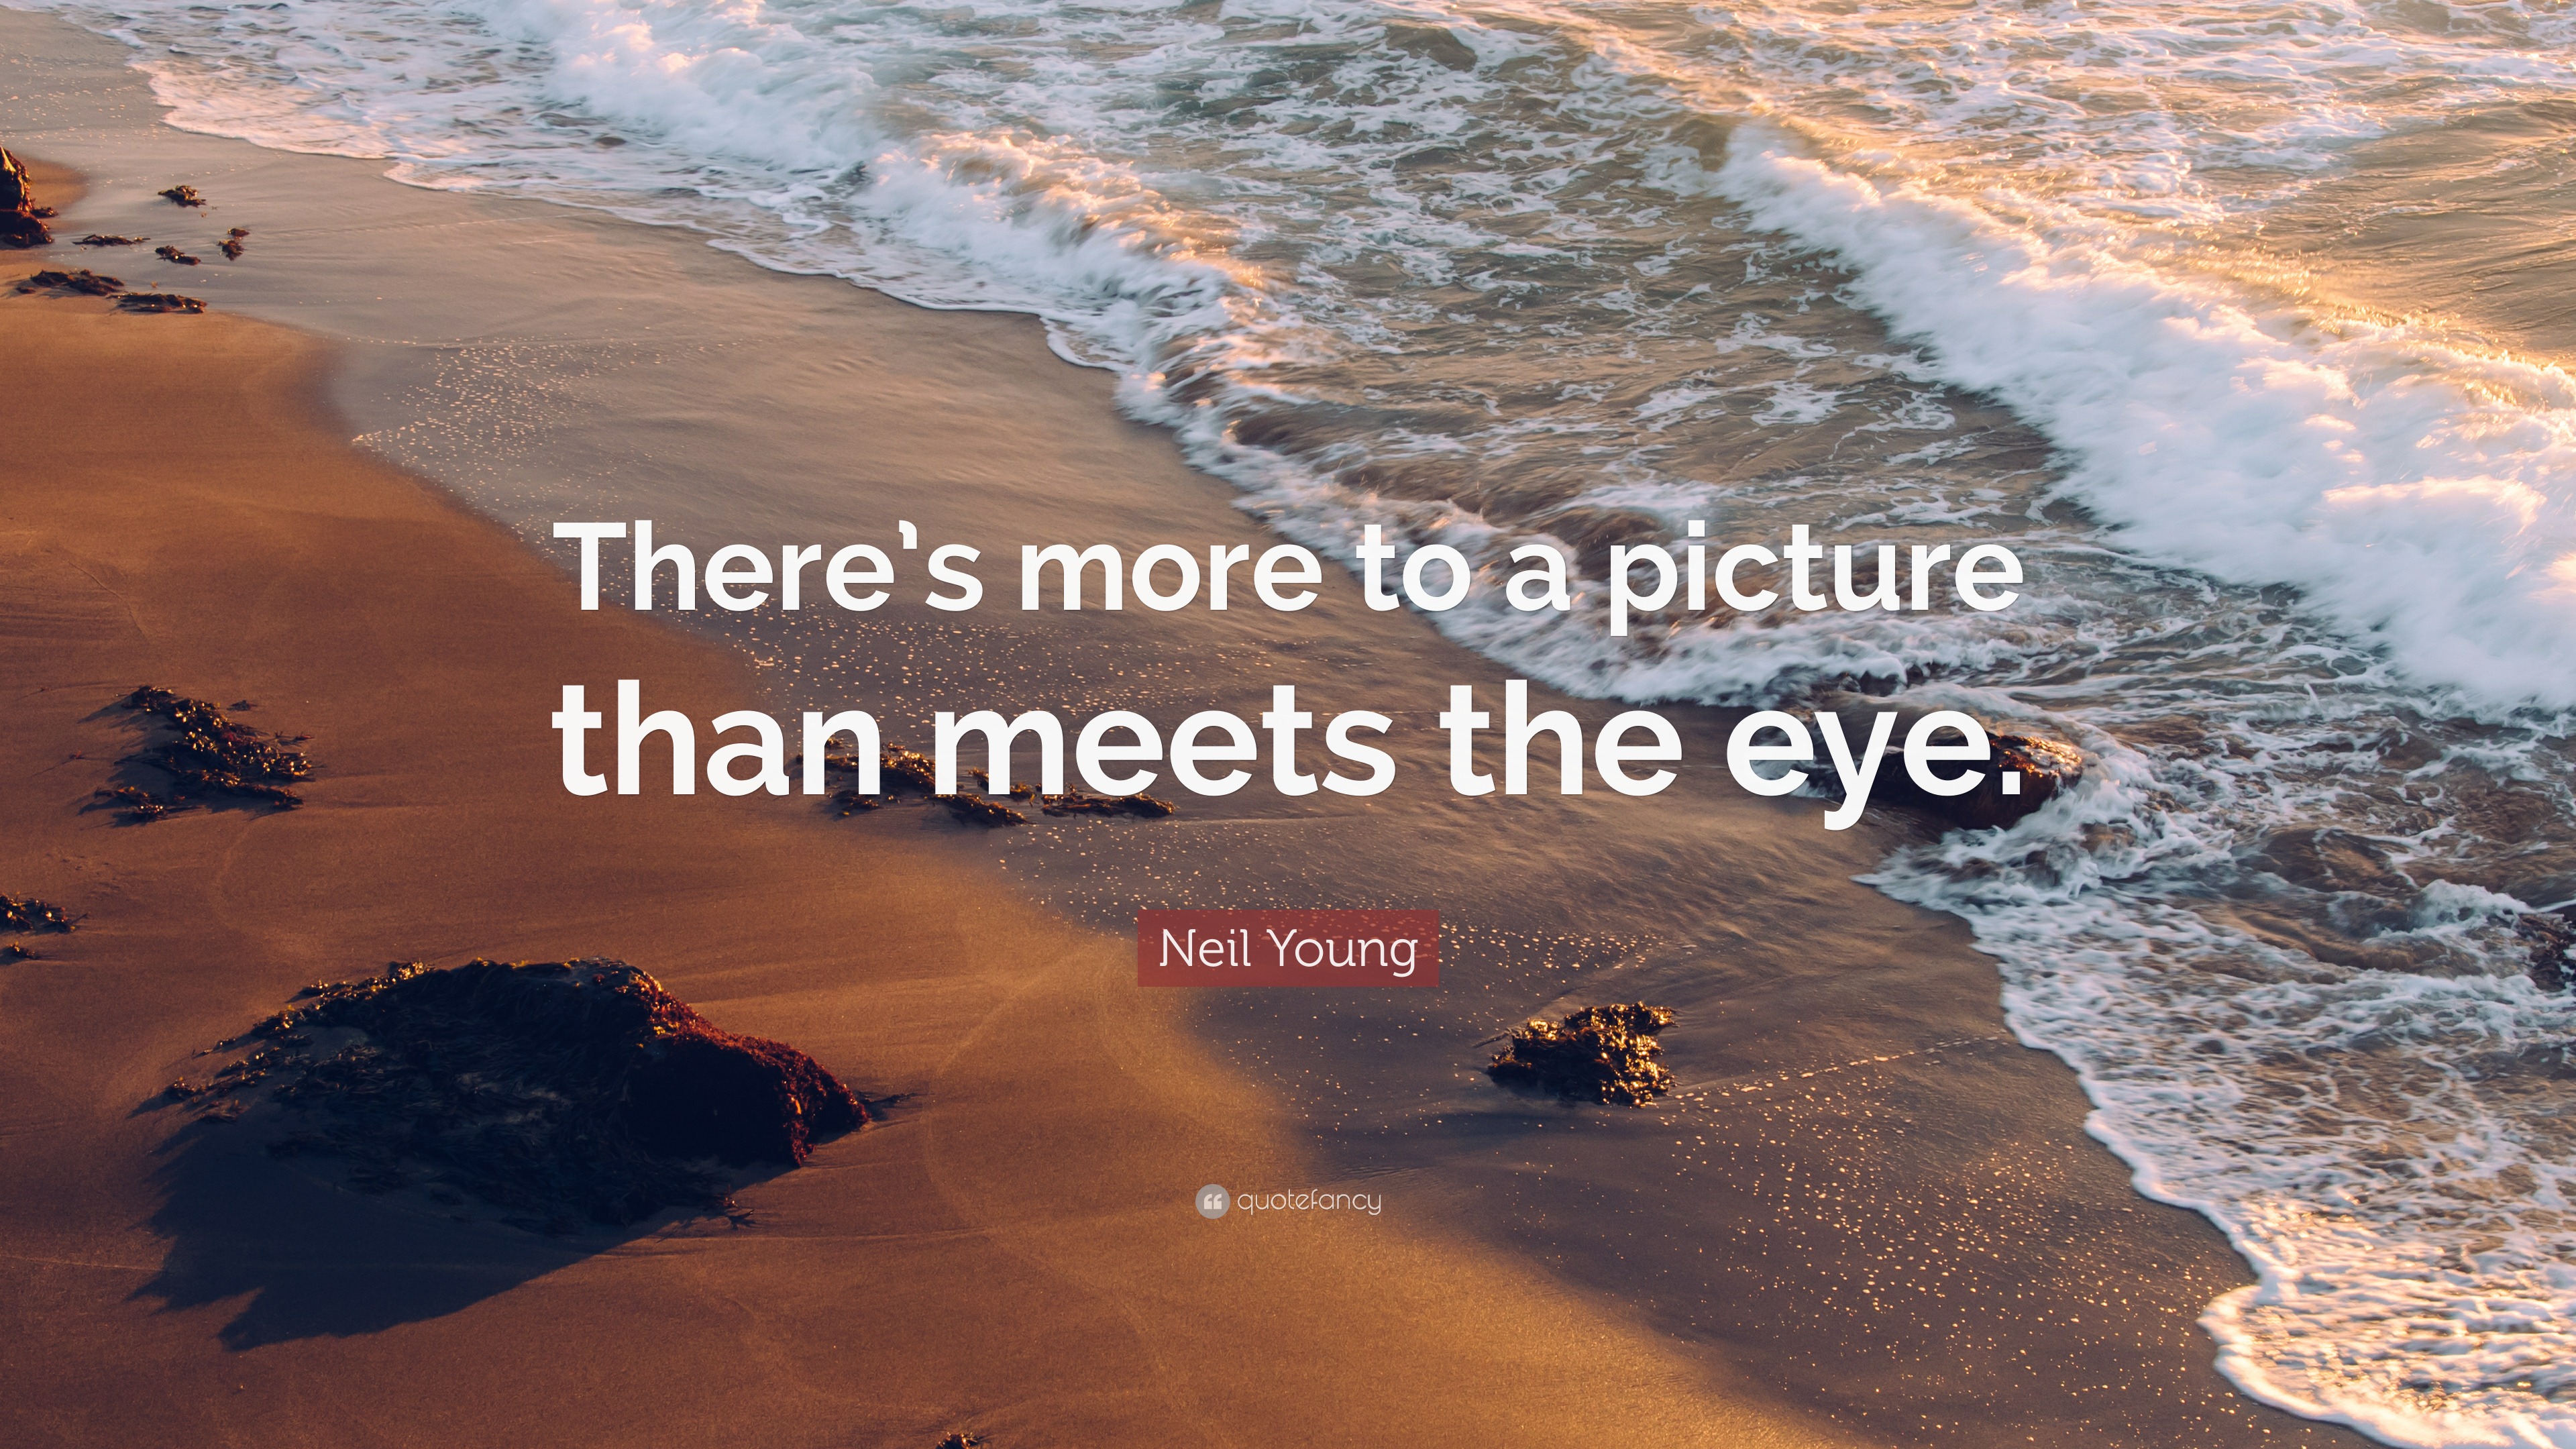 There is more to the picture than meets the eye